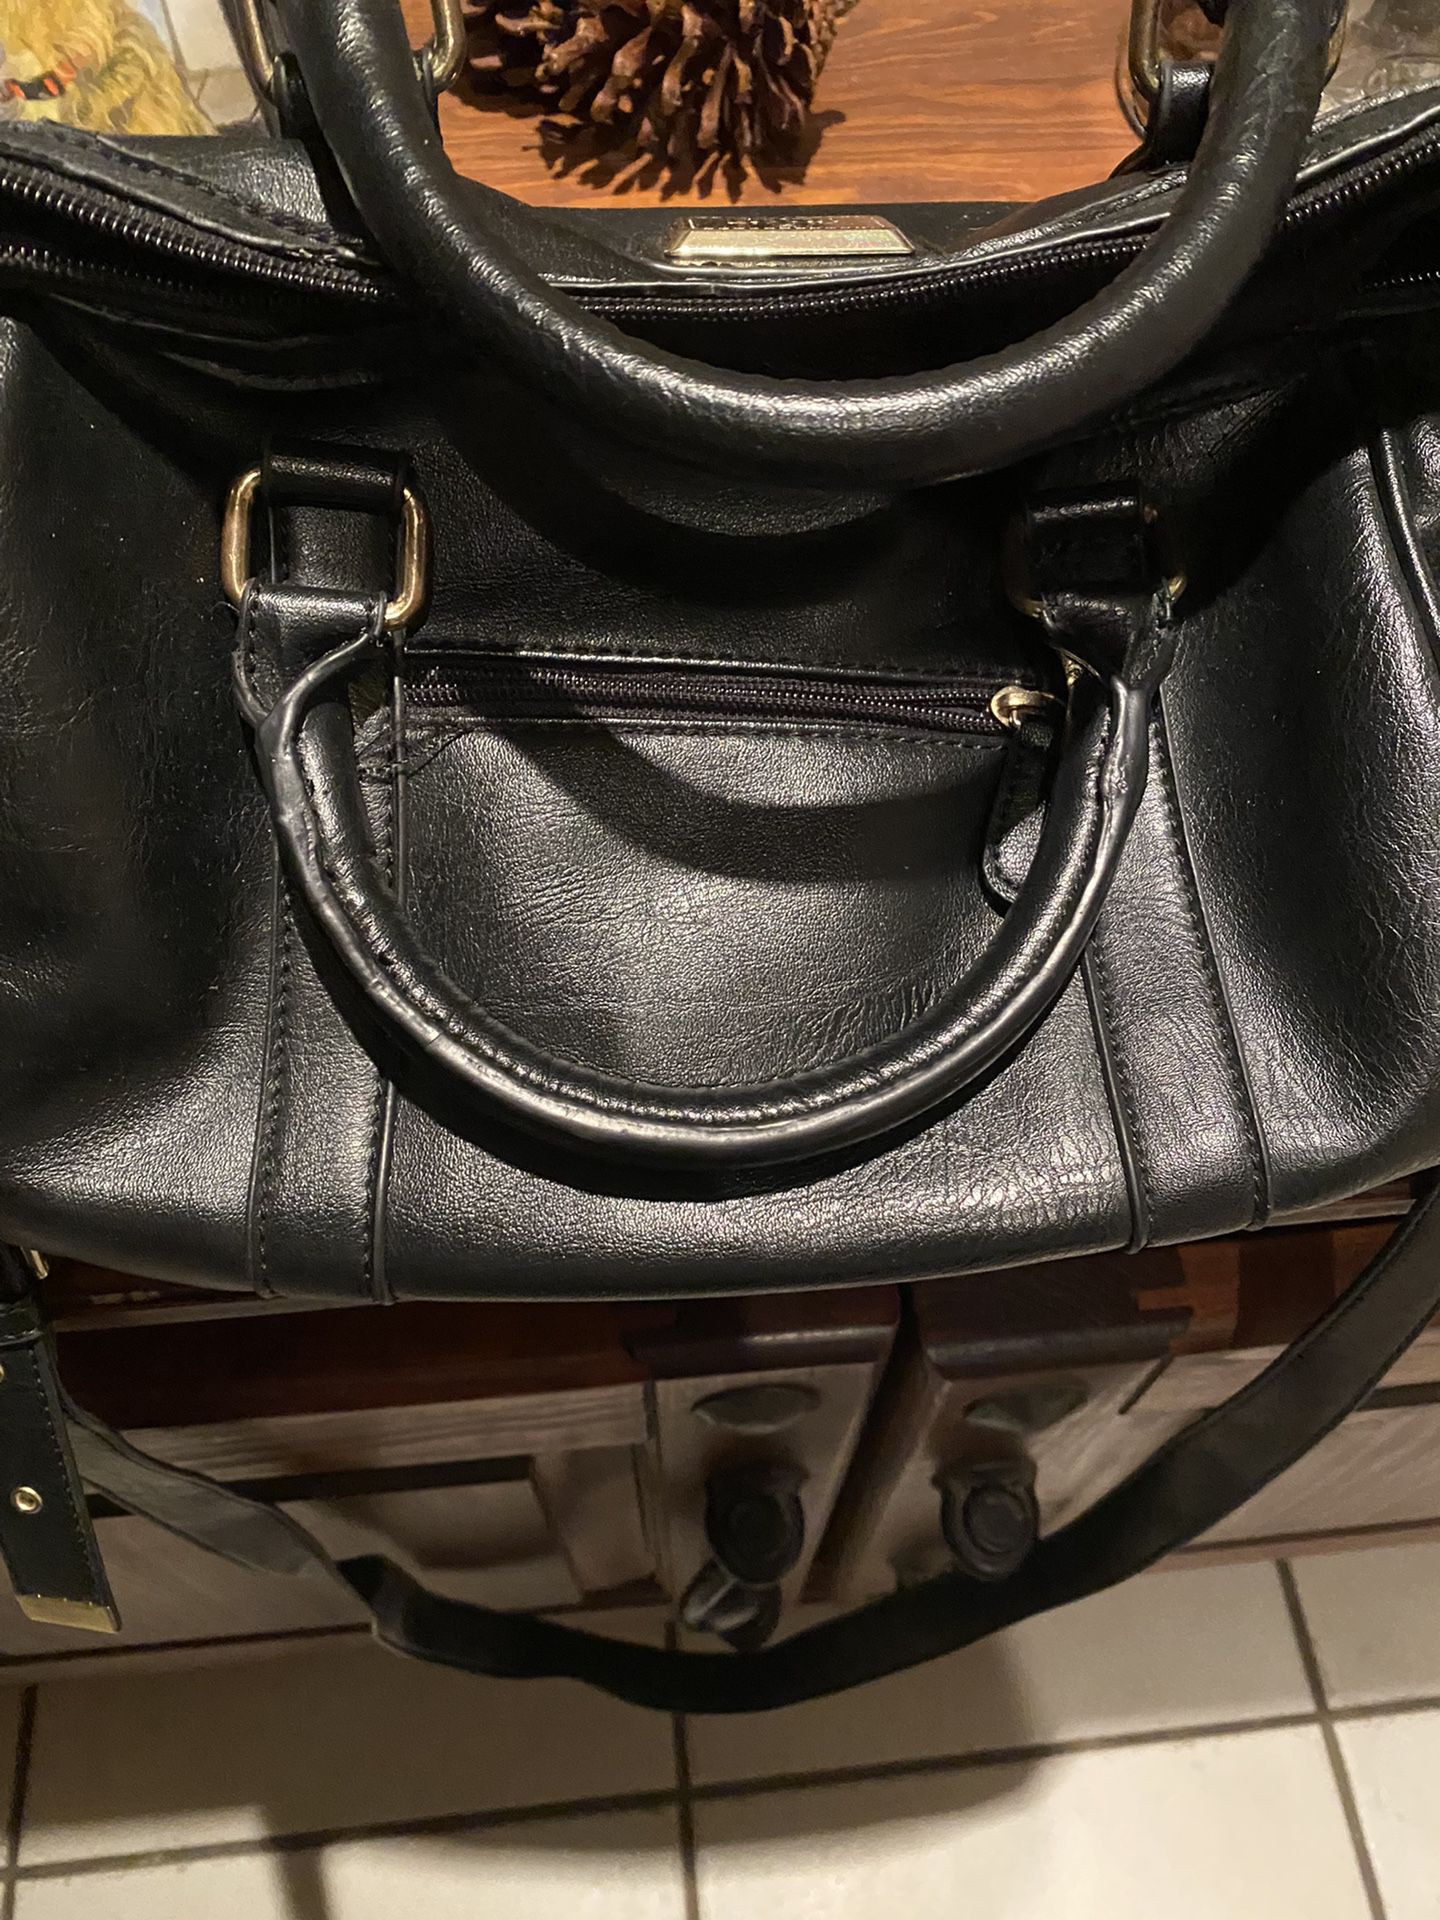 BIMBA Y LOLA AUTHENTIC PURSE for Sale in Fort Lauderdale, FL - OfferUp